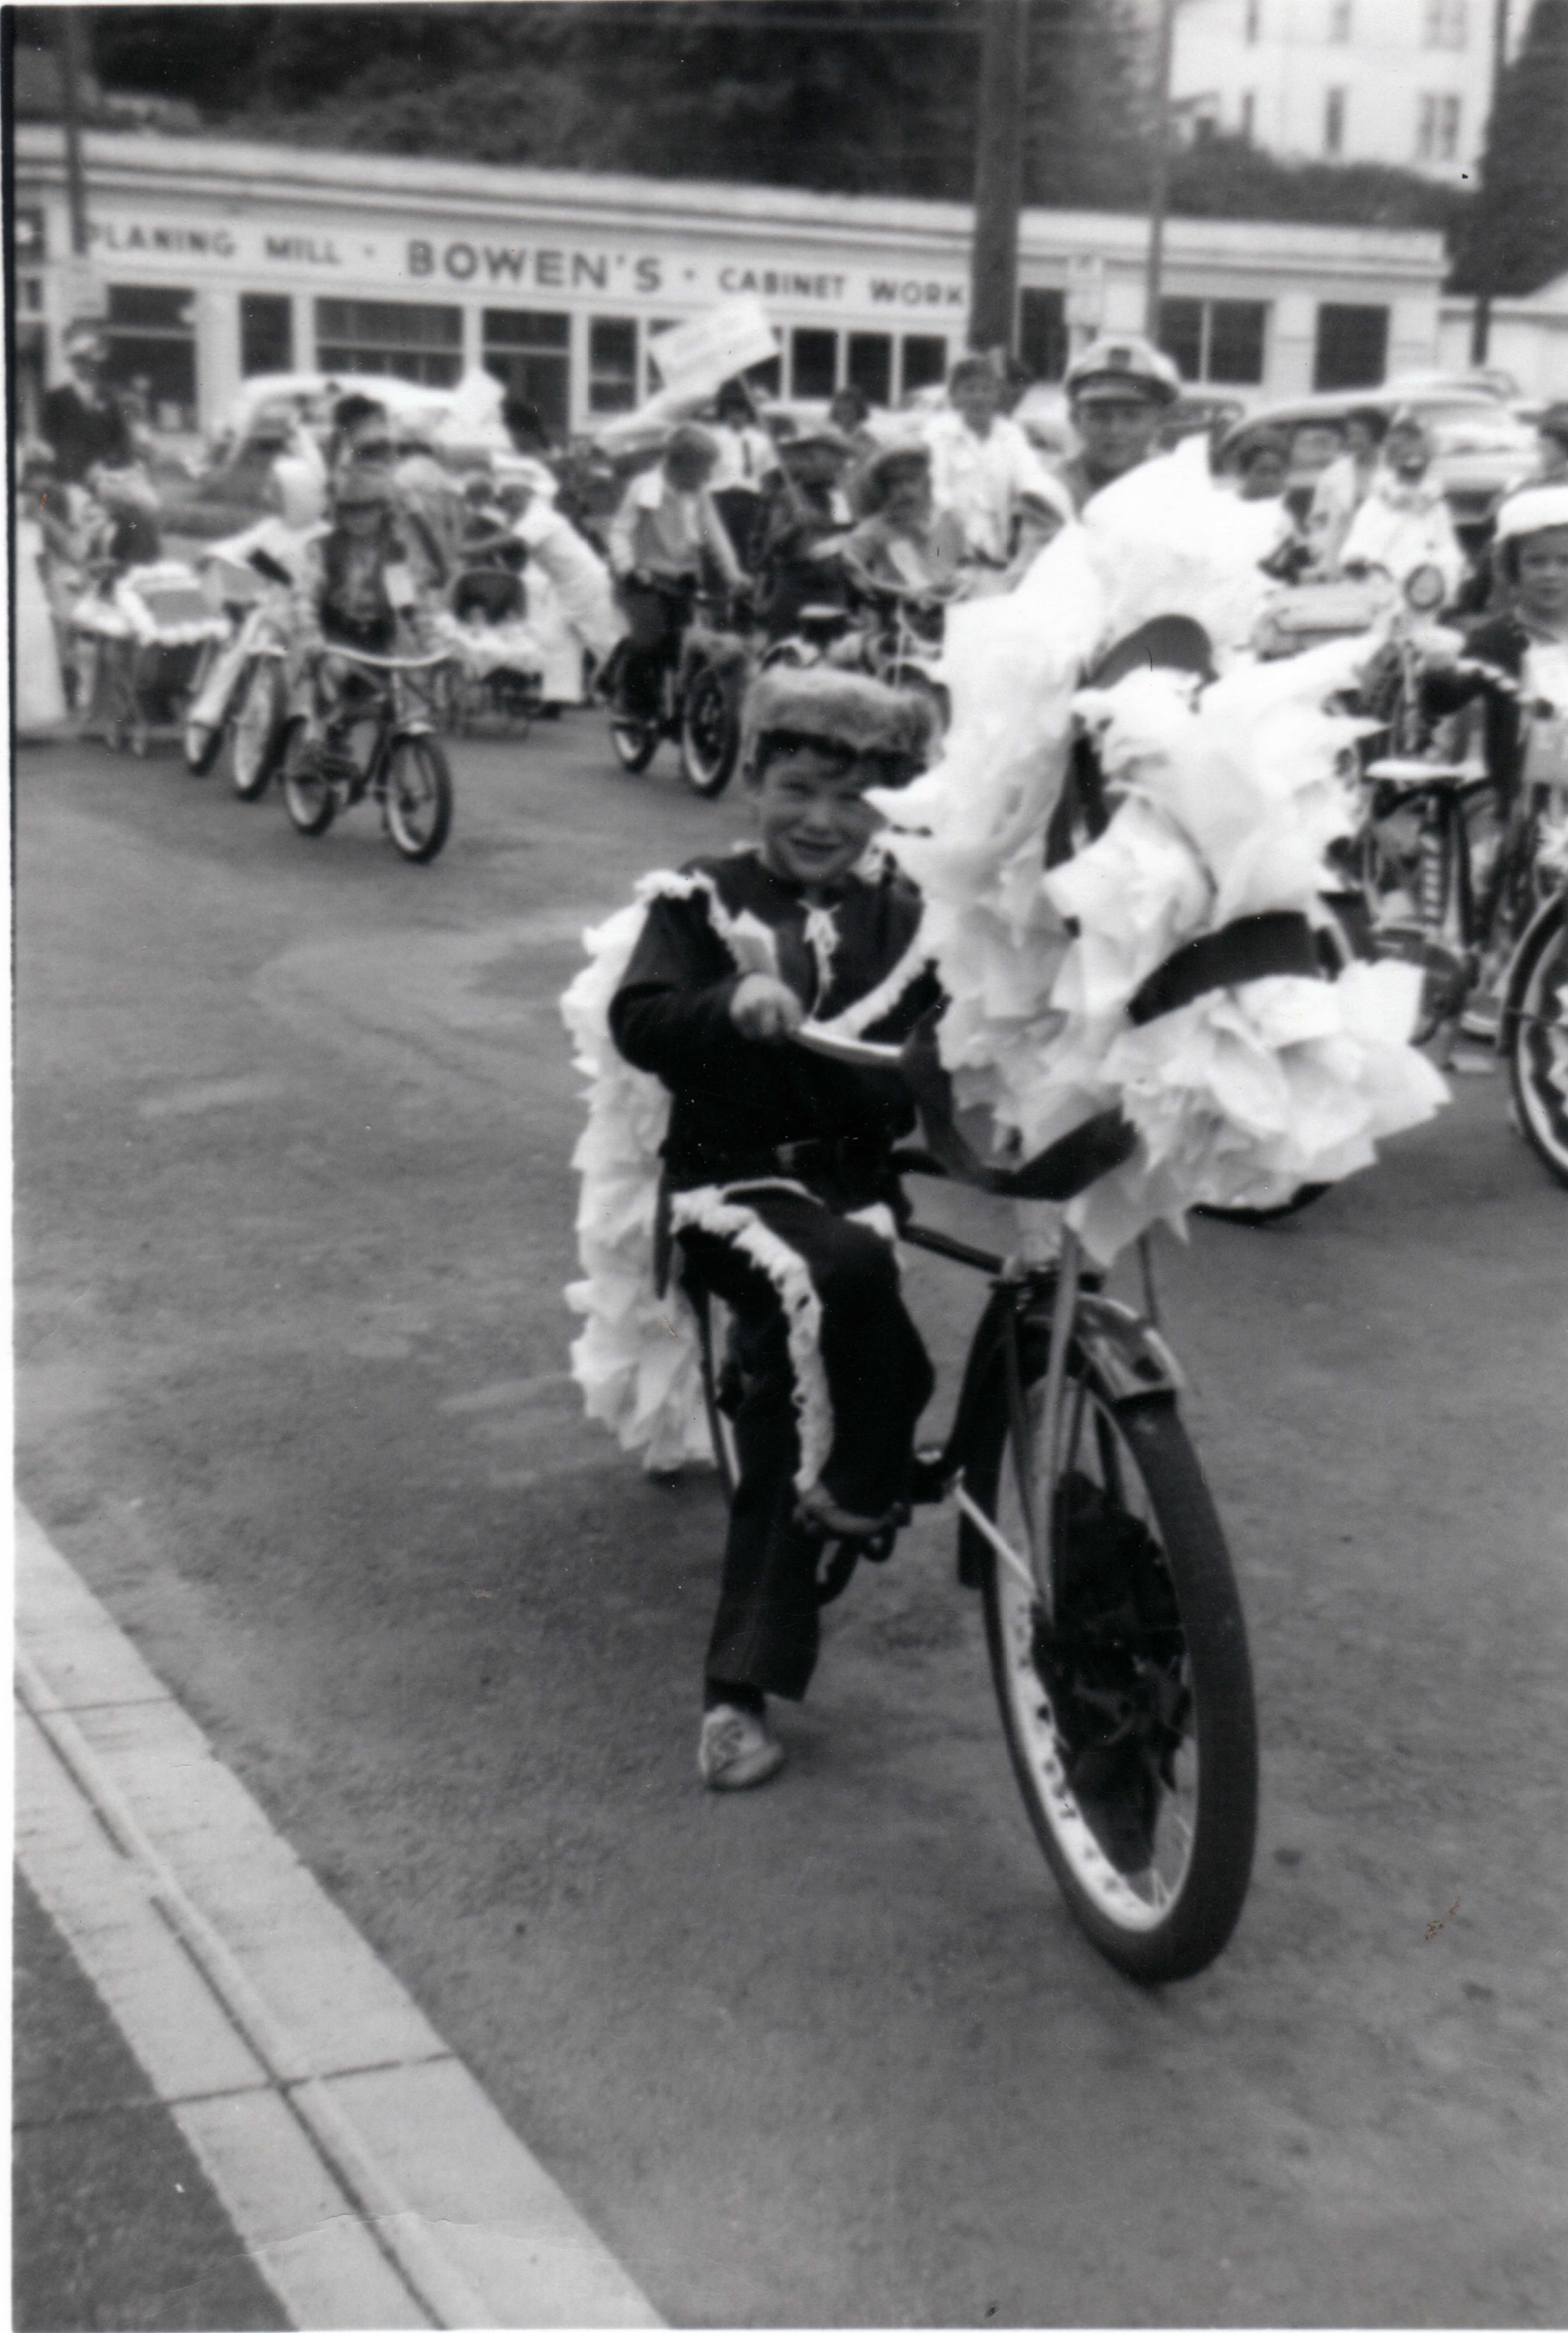 rb bruce sesquicentinial parade aug 19 1965 001